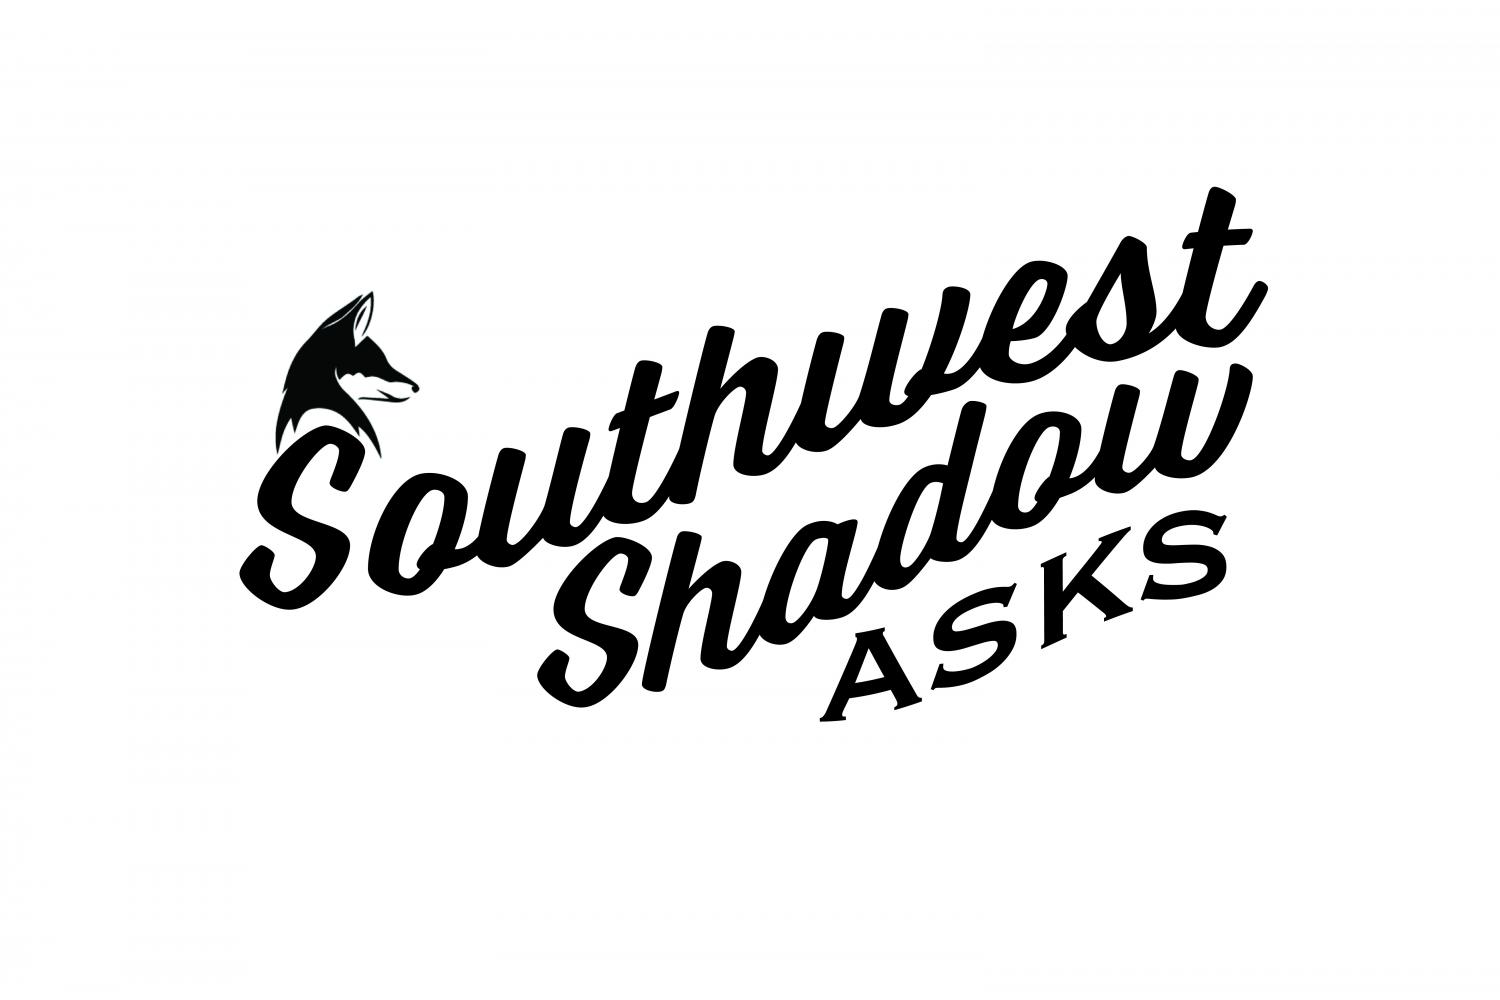 Southwest Shadow Asks: Nia Anderson